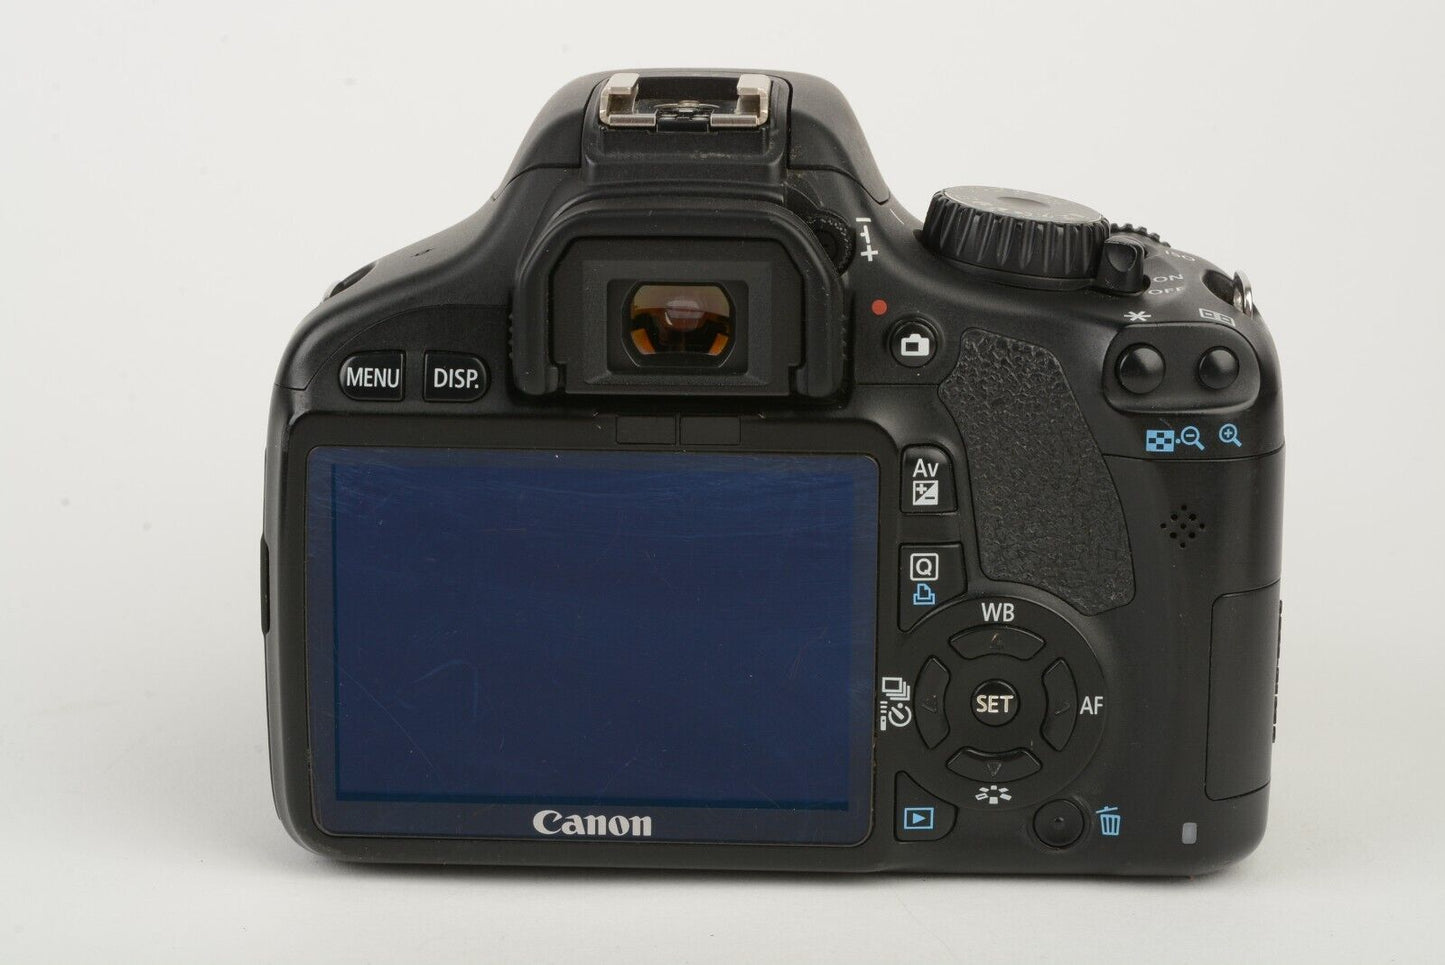 Canon Rebel T2i DSLR w/EF-S 18-55mm f3.5-5.6 IS, 8GB SD card, Only 6932 acts.